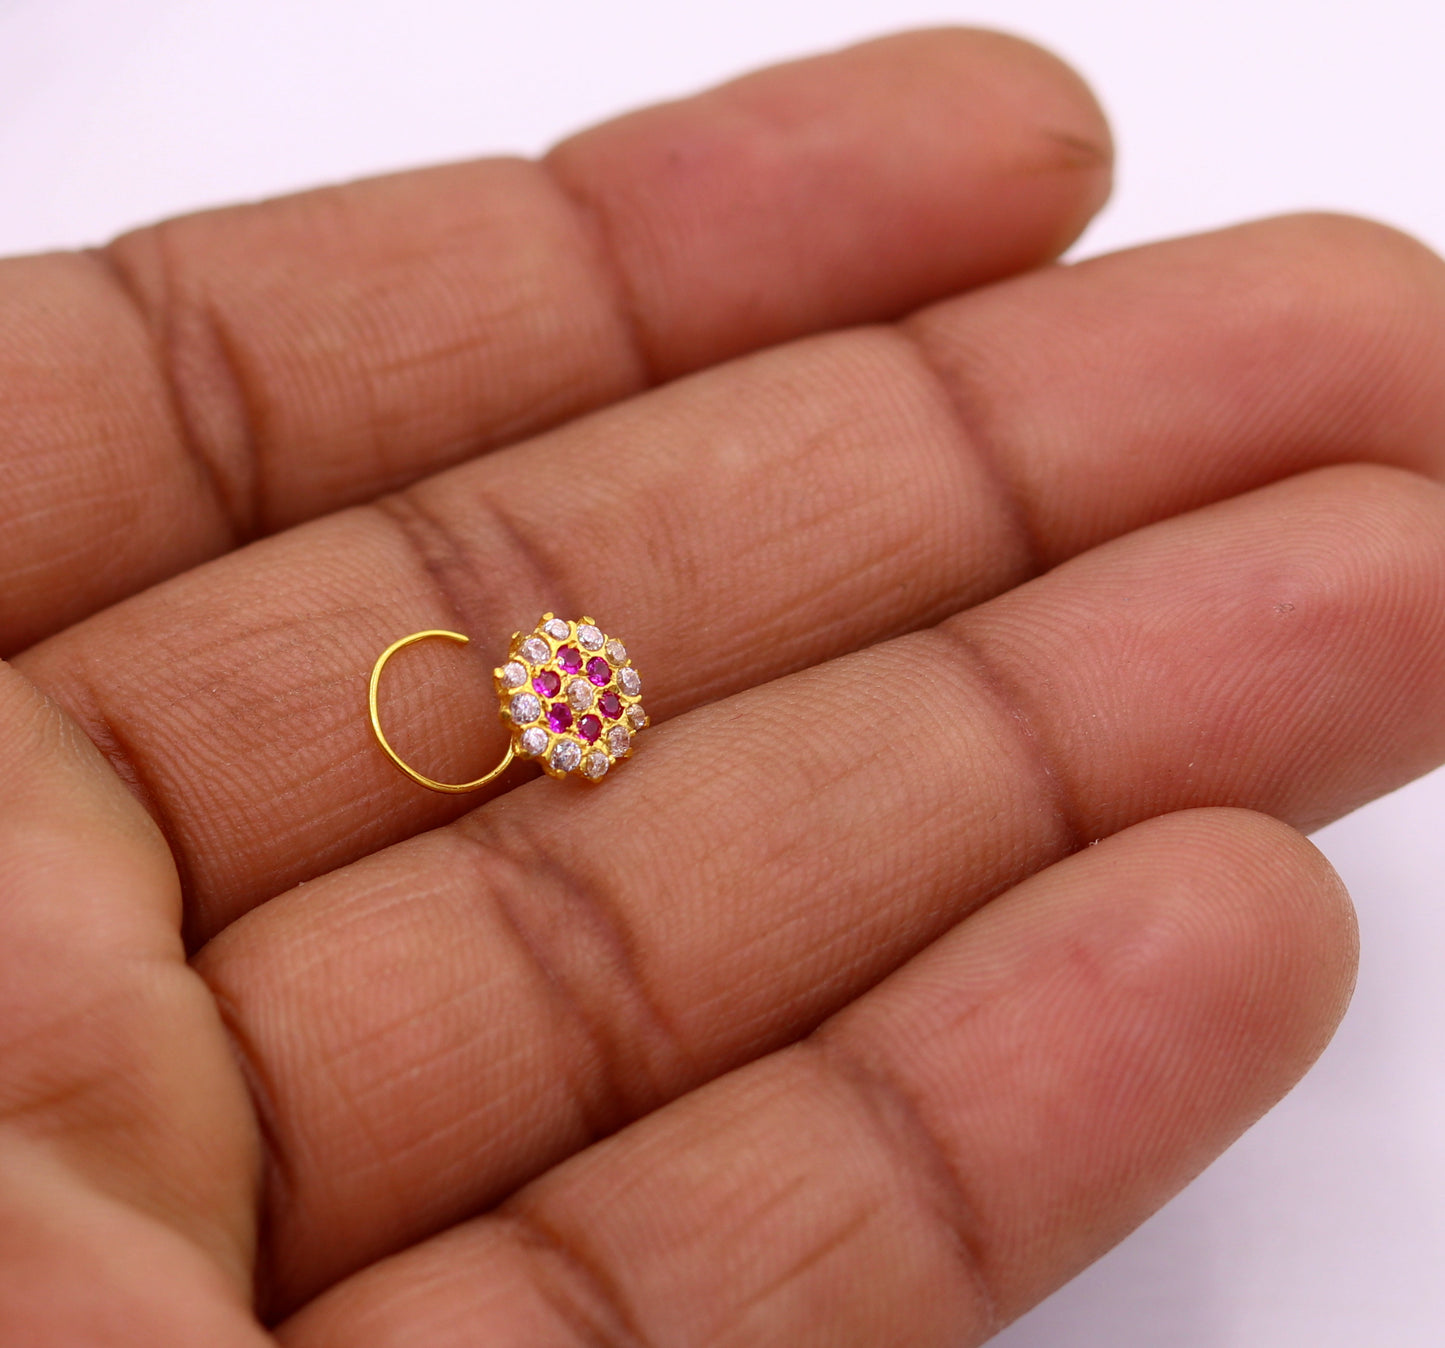 18kt yellow gold handmade fabulous pink color stone cubic zircon nose stud,excellent women girls daily use jewelry from Rajasthan gnp17 - TRIBAL ORNAMENTS